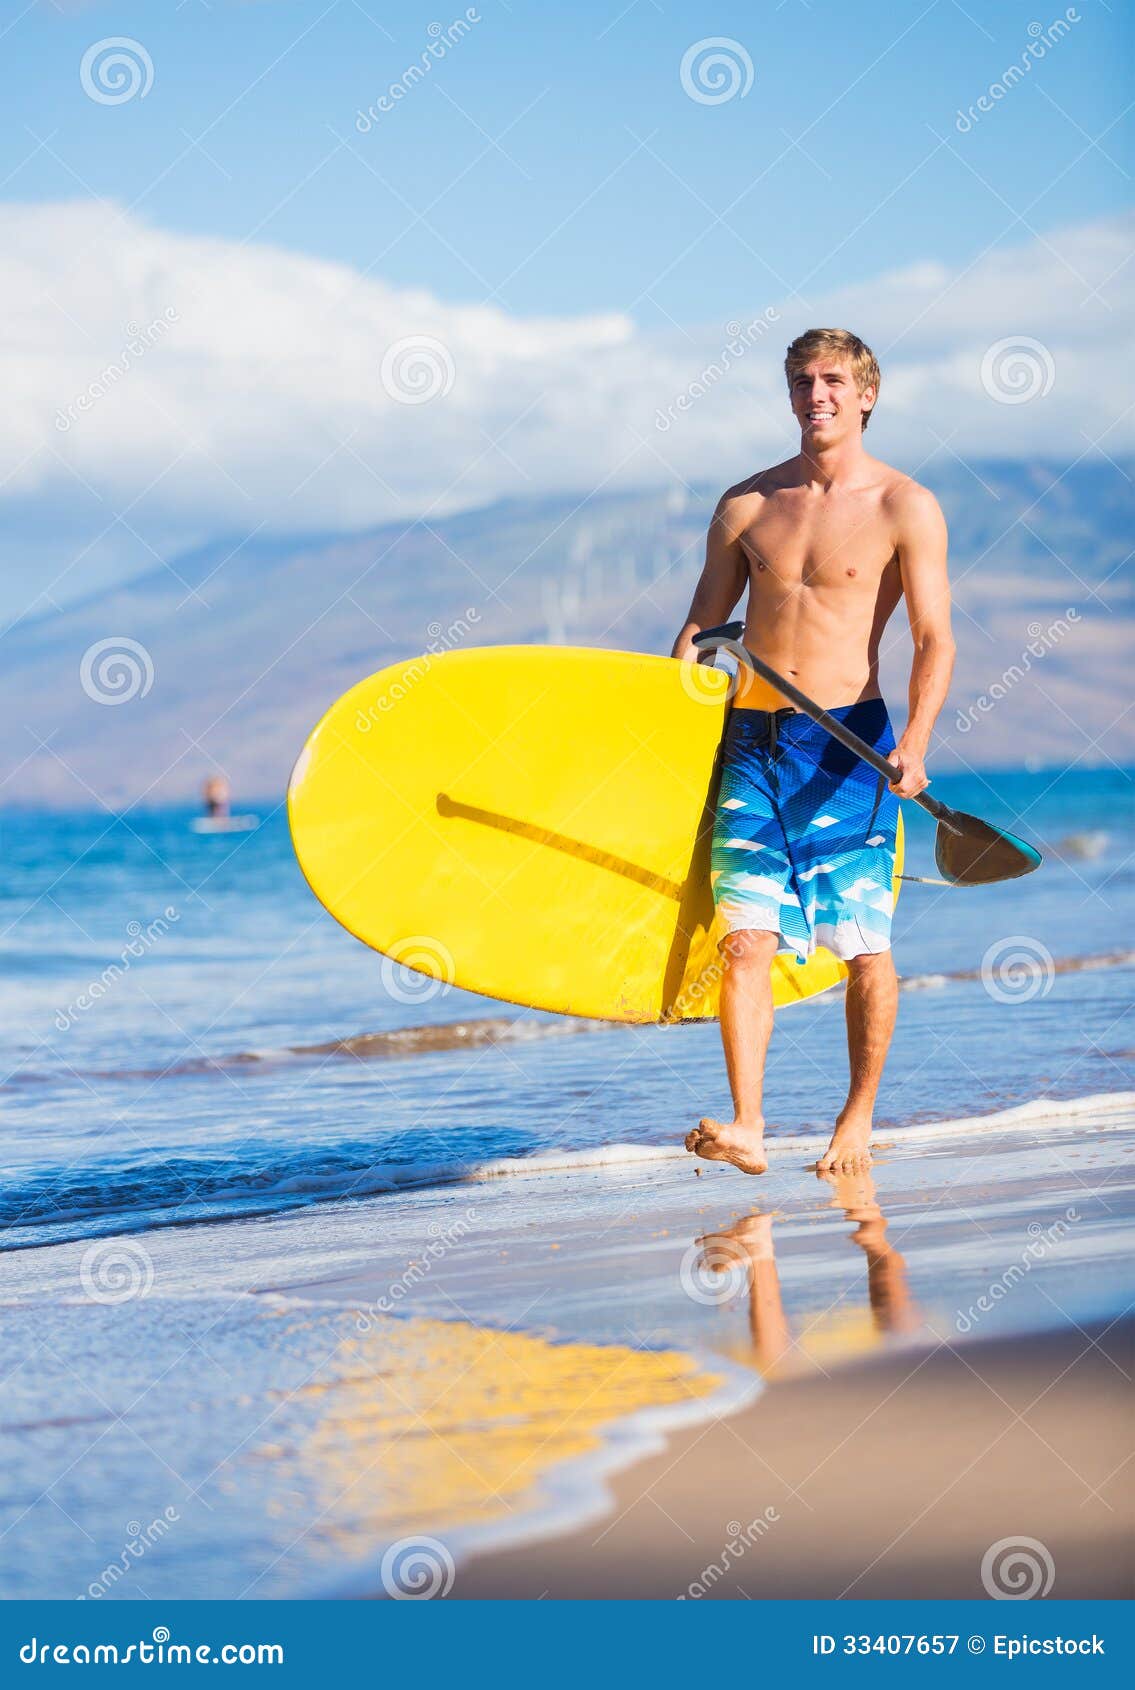 Man with Stand Up Paddle Board Stock Image - Image of sport, surfer ...